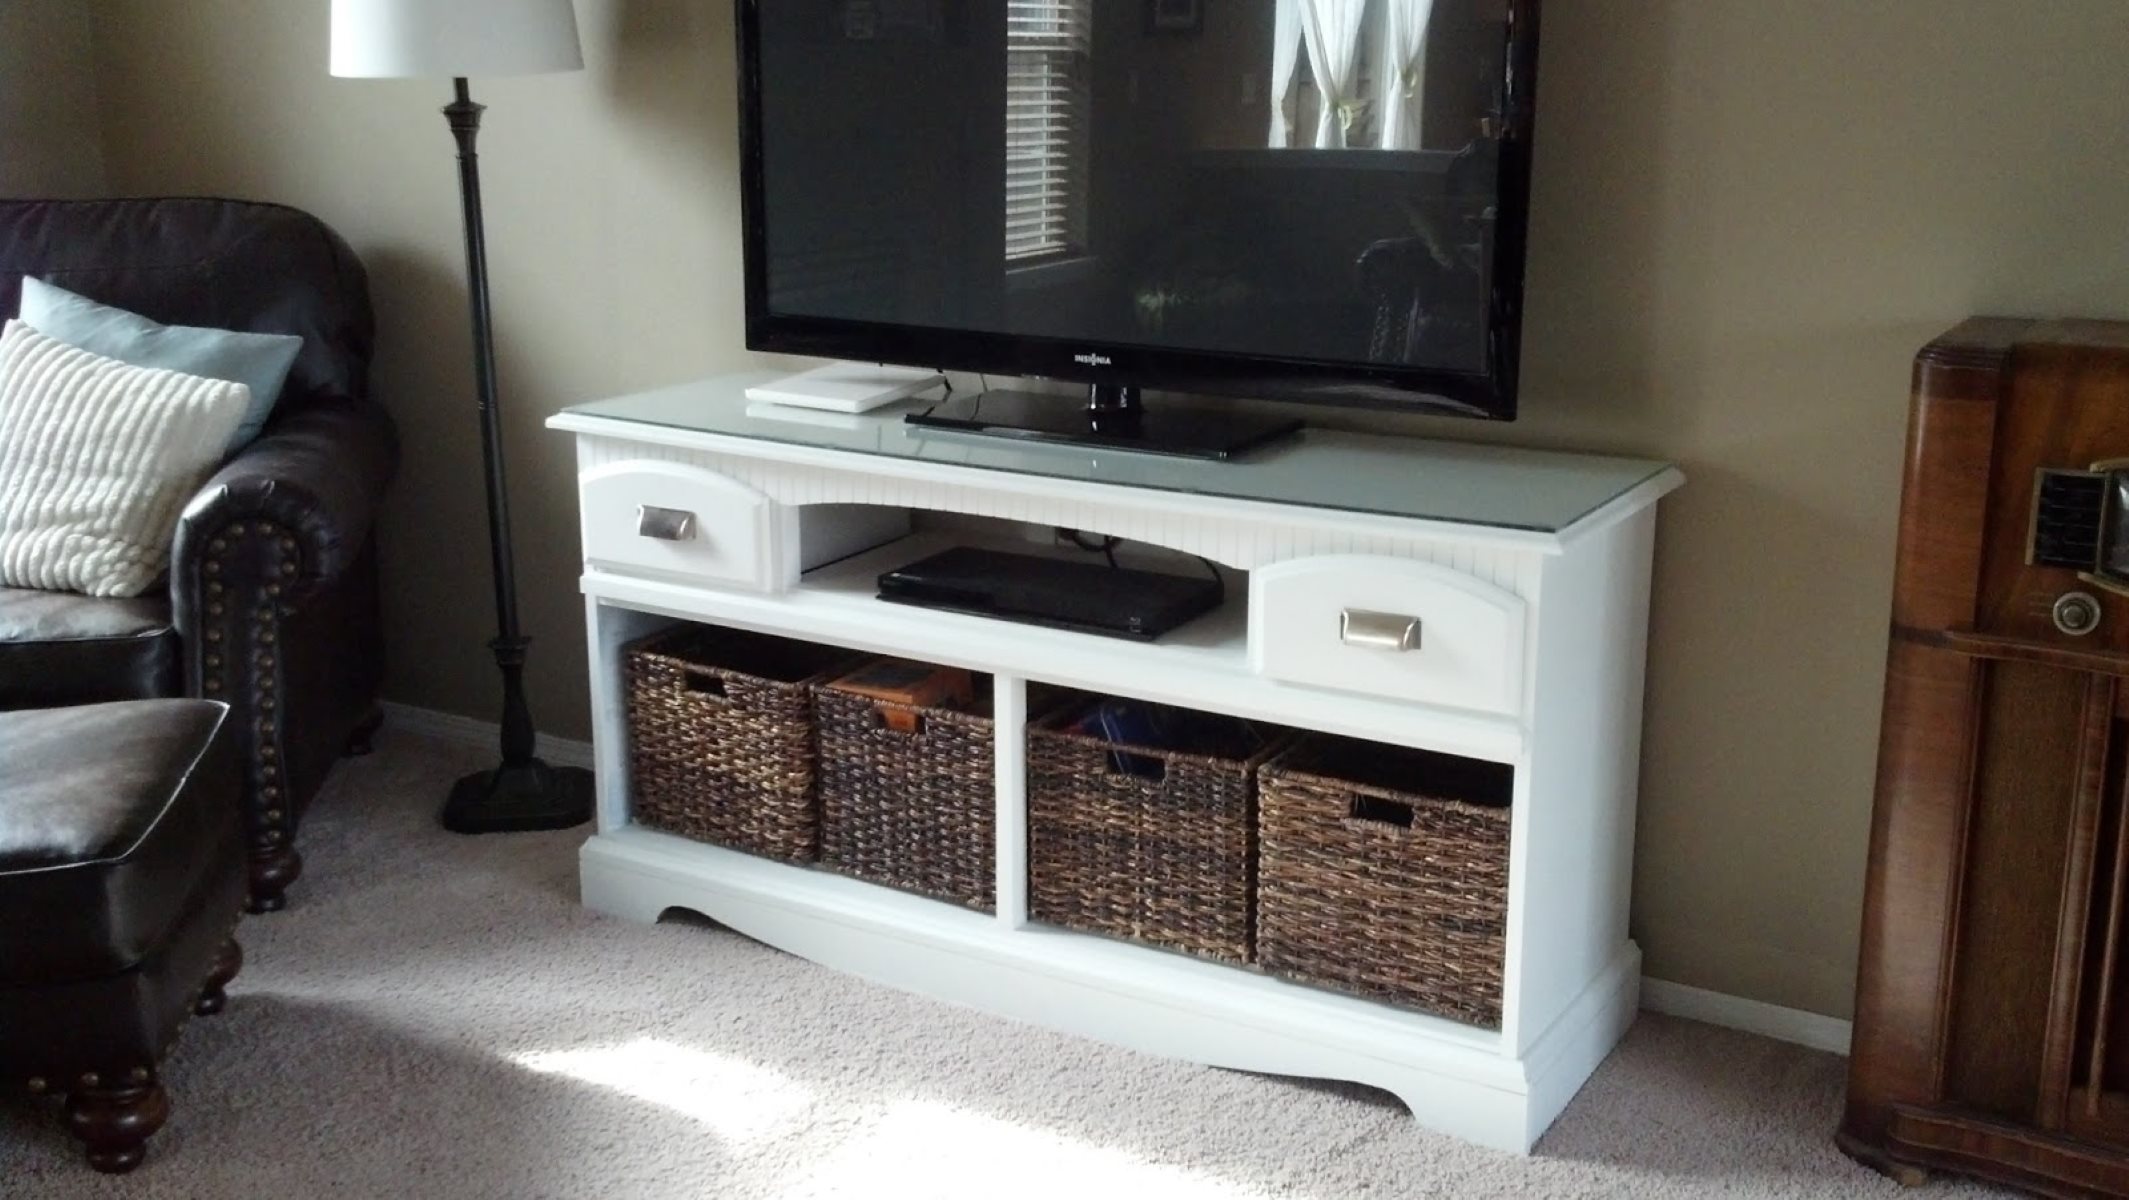 How To Turn A Dresser Into A Tv Stand Storables